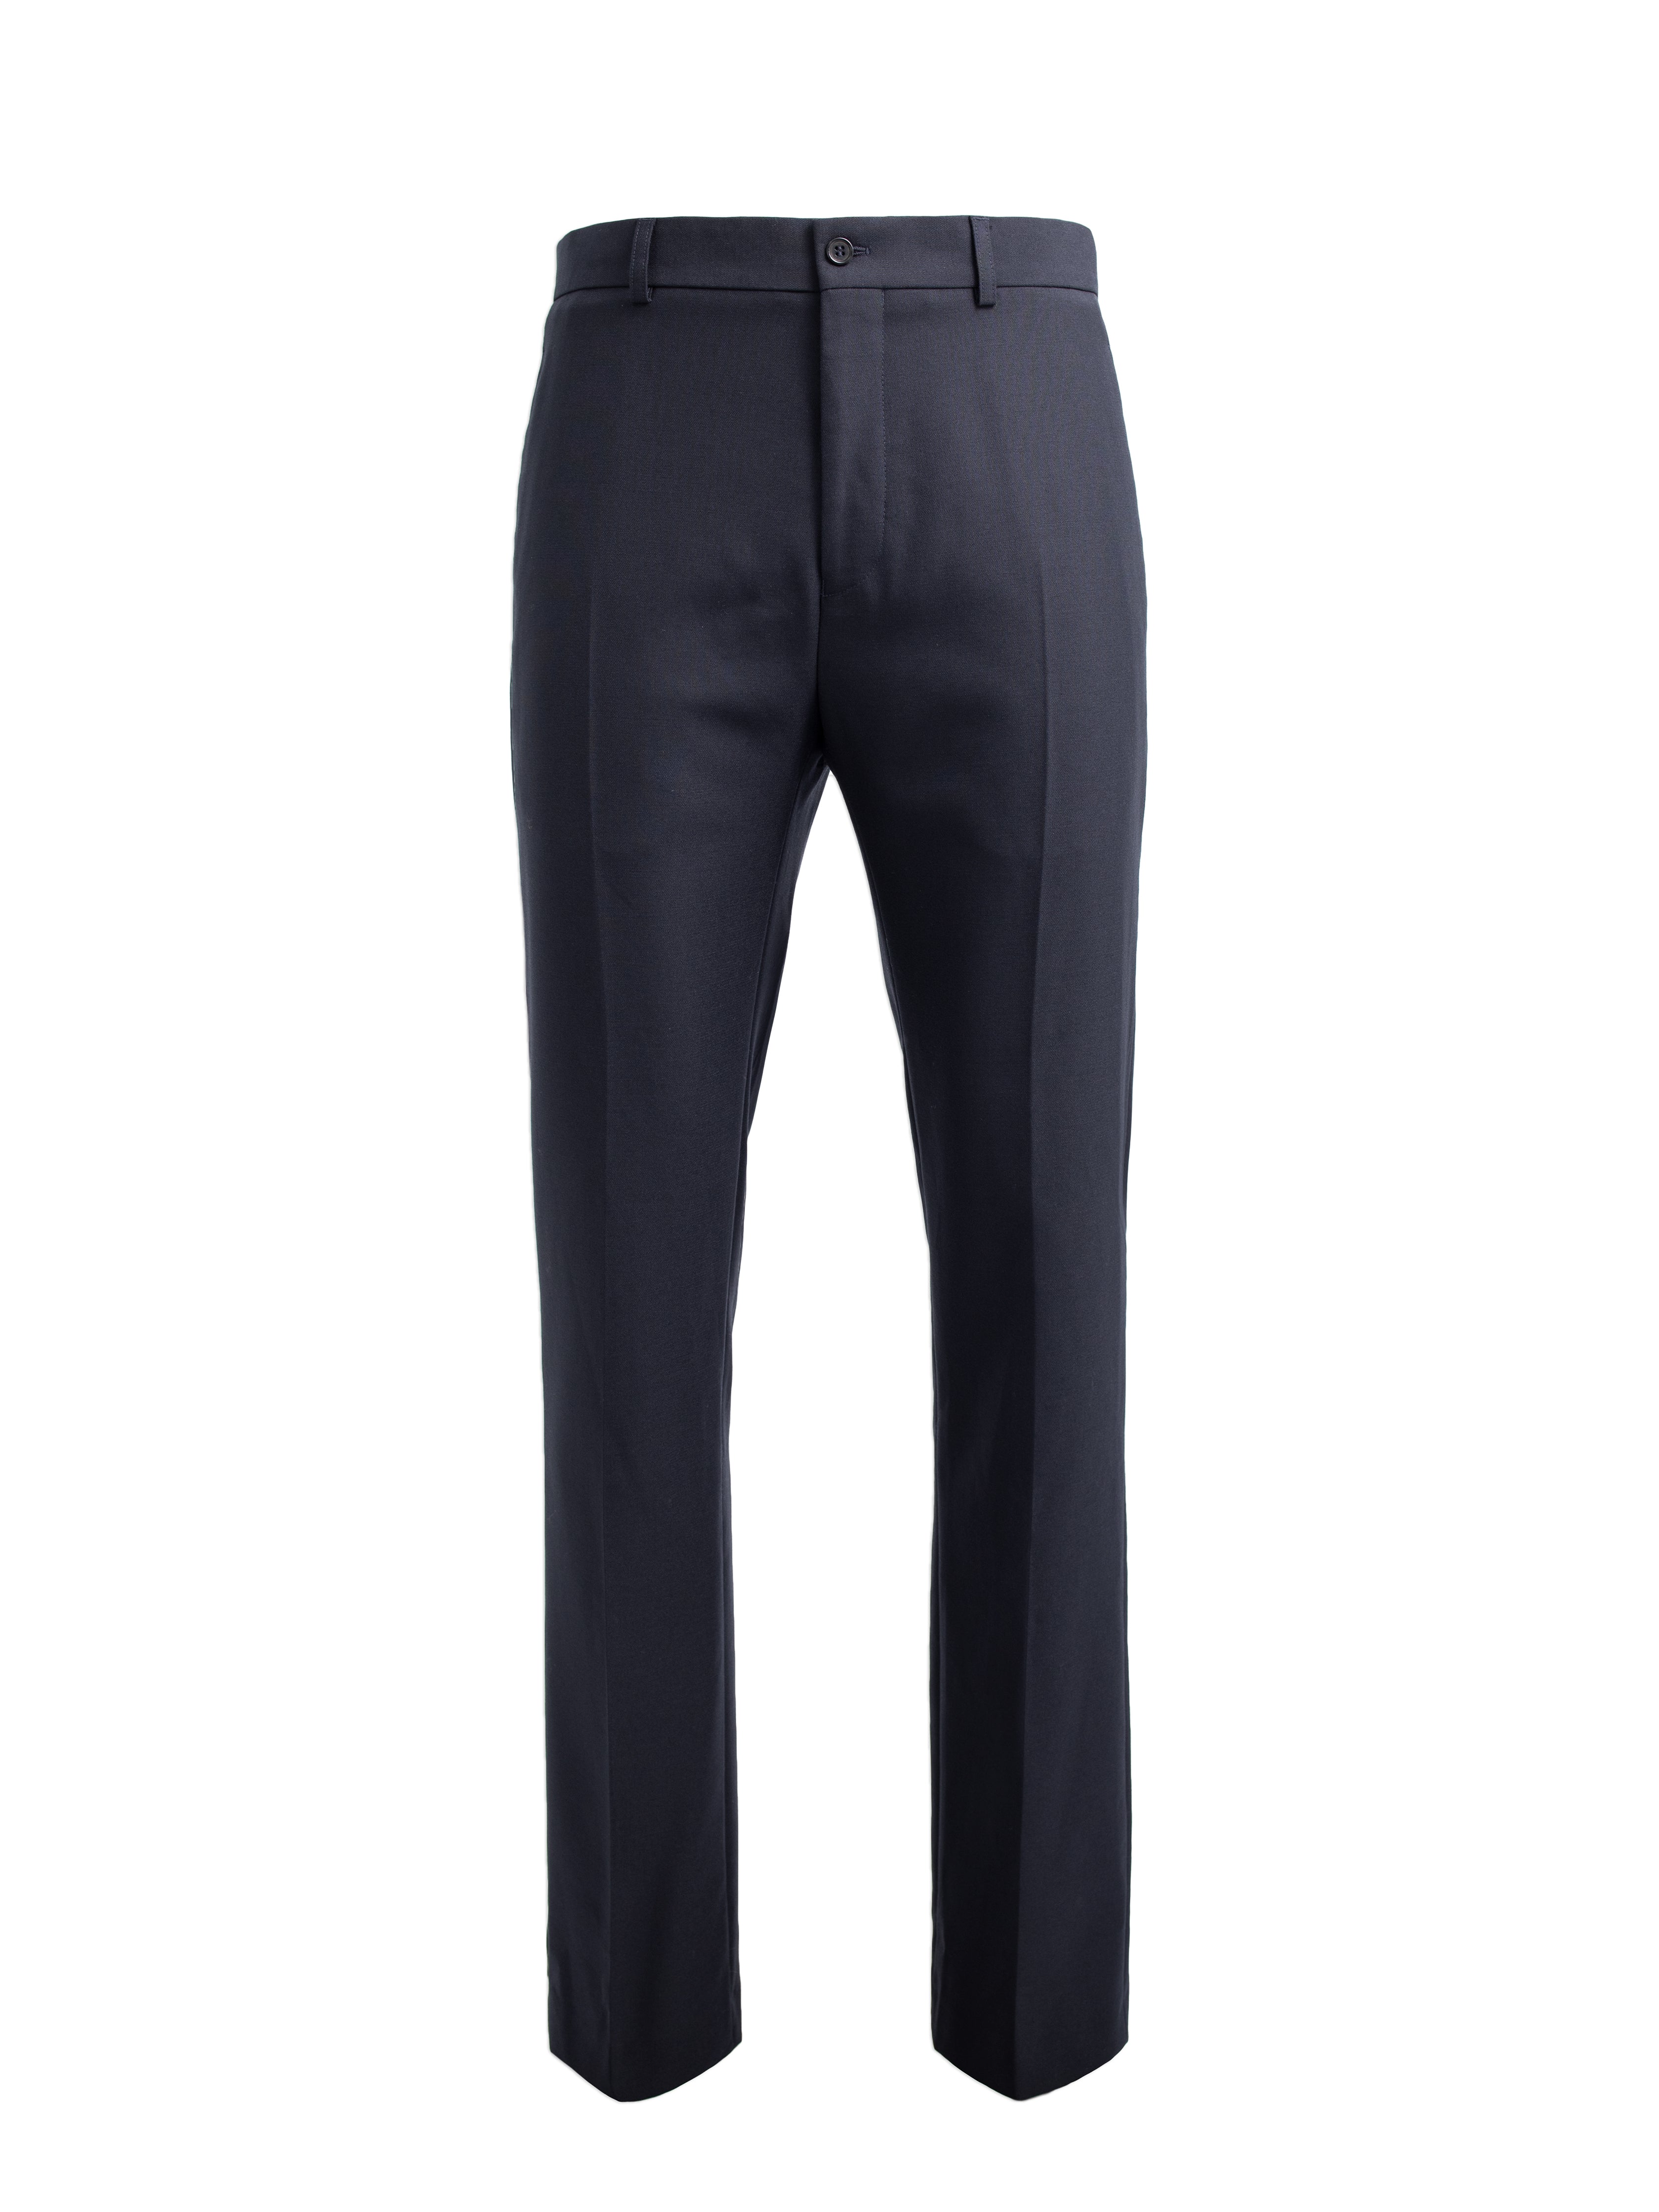 NAVY STRAIGHT LEG SUIT TROUSERS